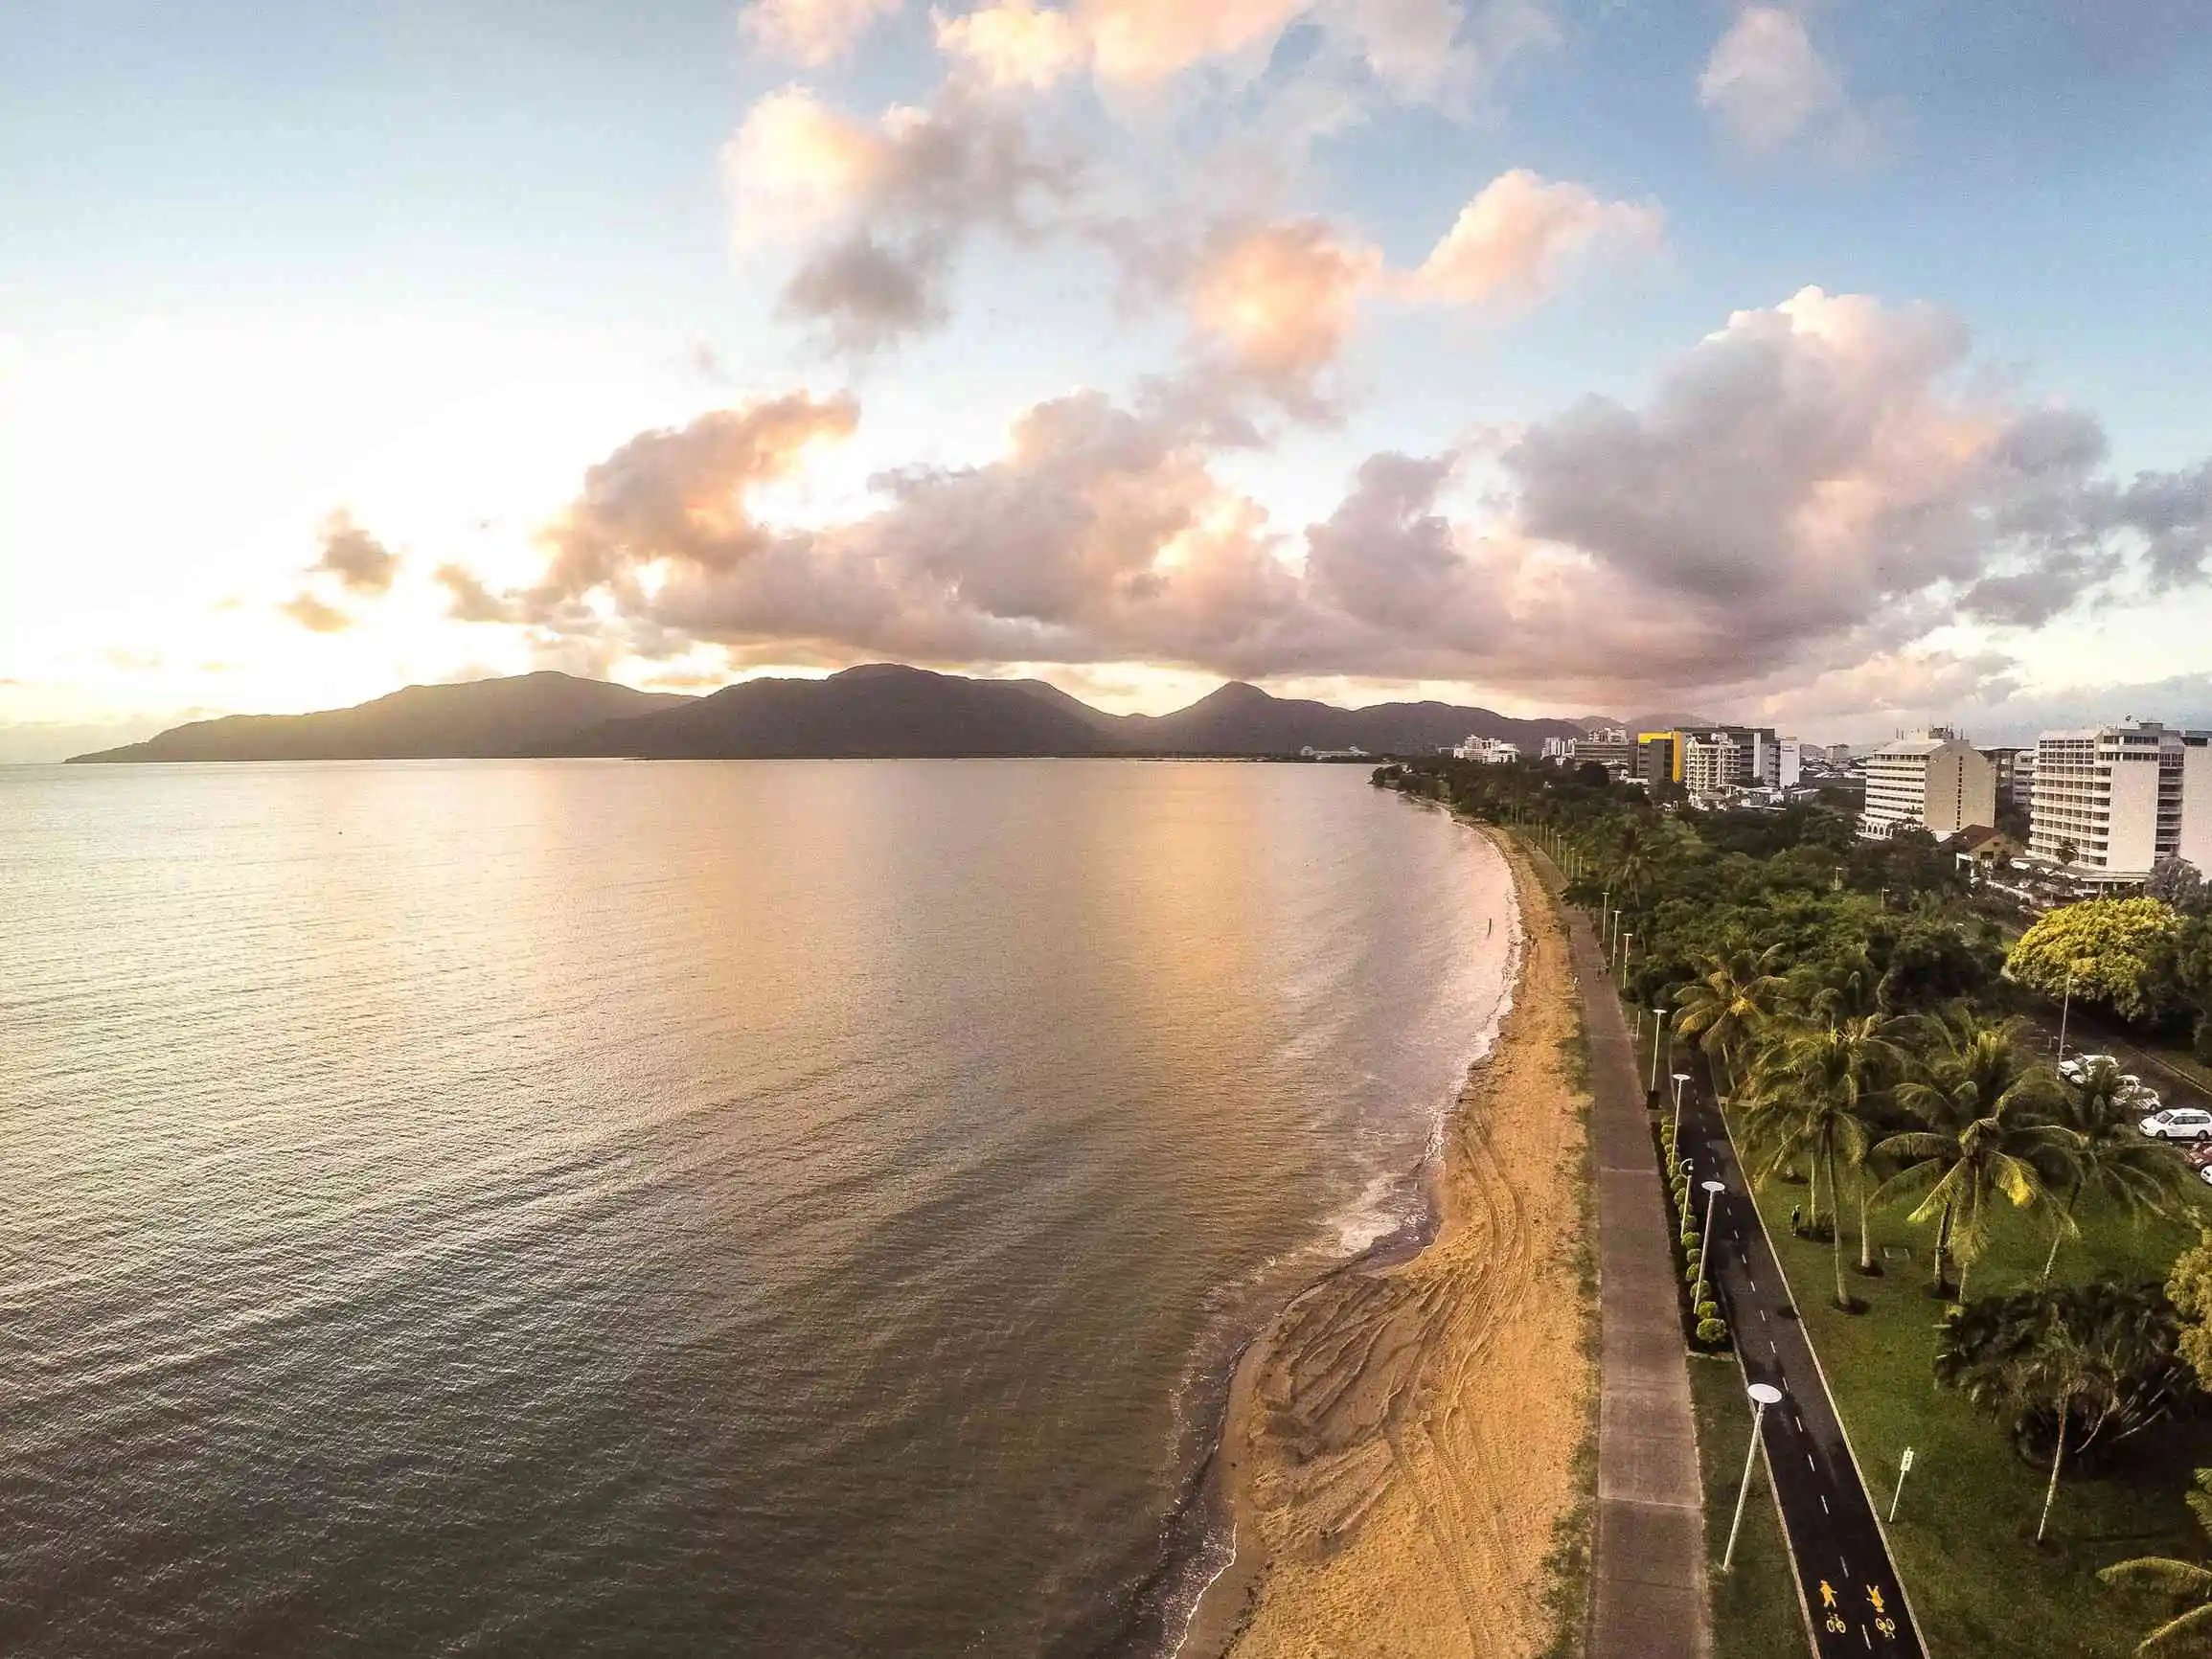 A view of cairns city edge fringed with palm trees and sand meeting the sea, mountains in the background.